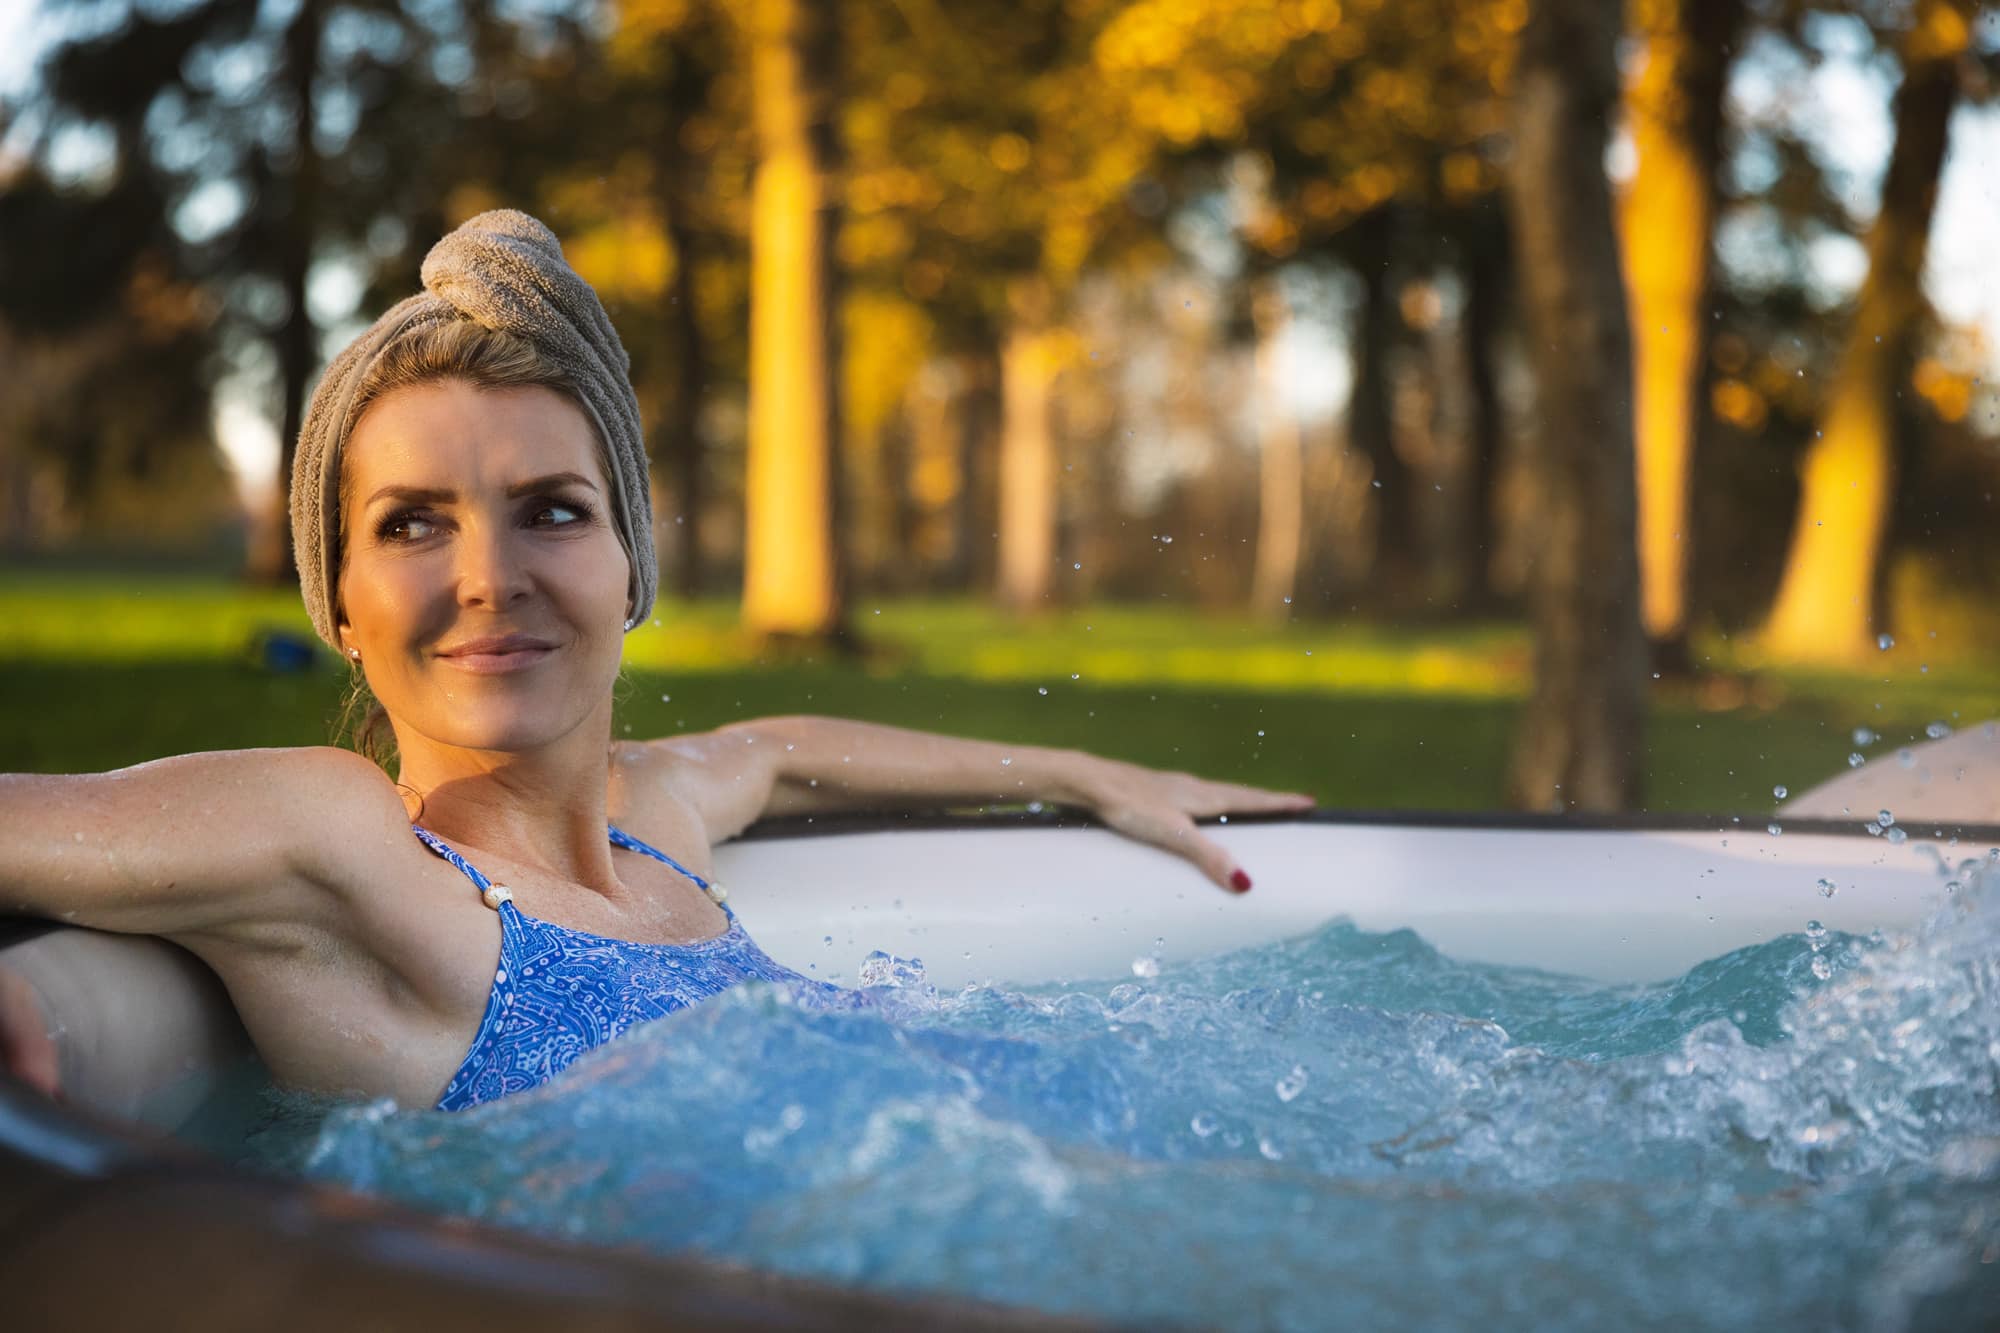 Relax in a Softub Spa this Fall 